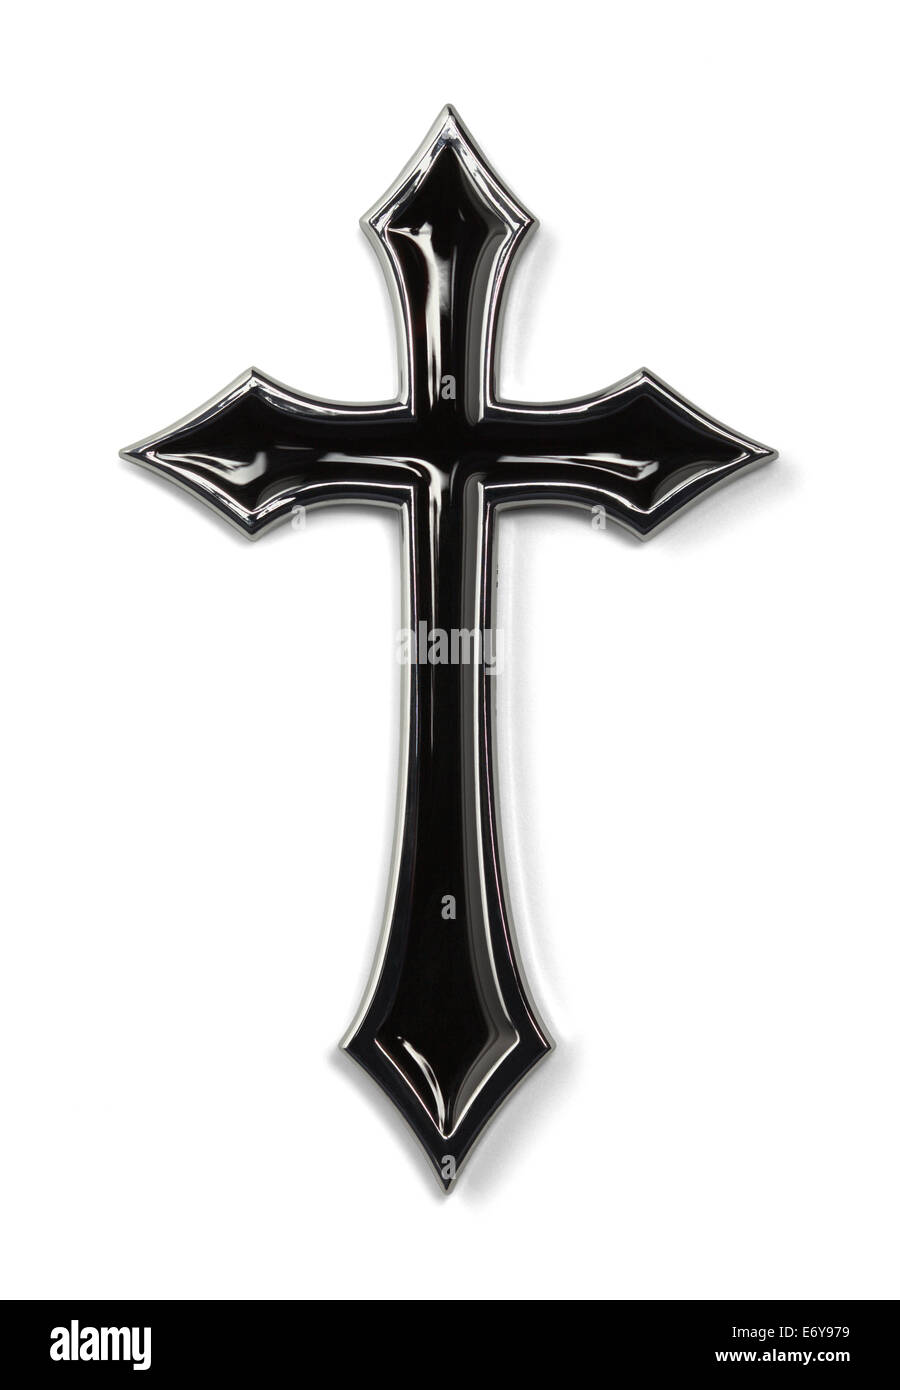 Gothic Black Metal Cross Isolated on White Background. Stock Photo